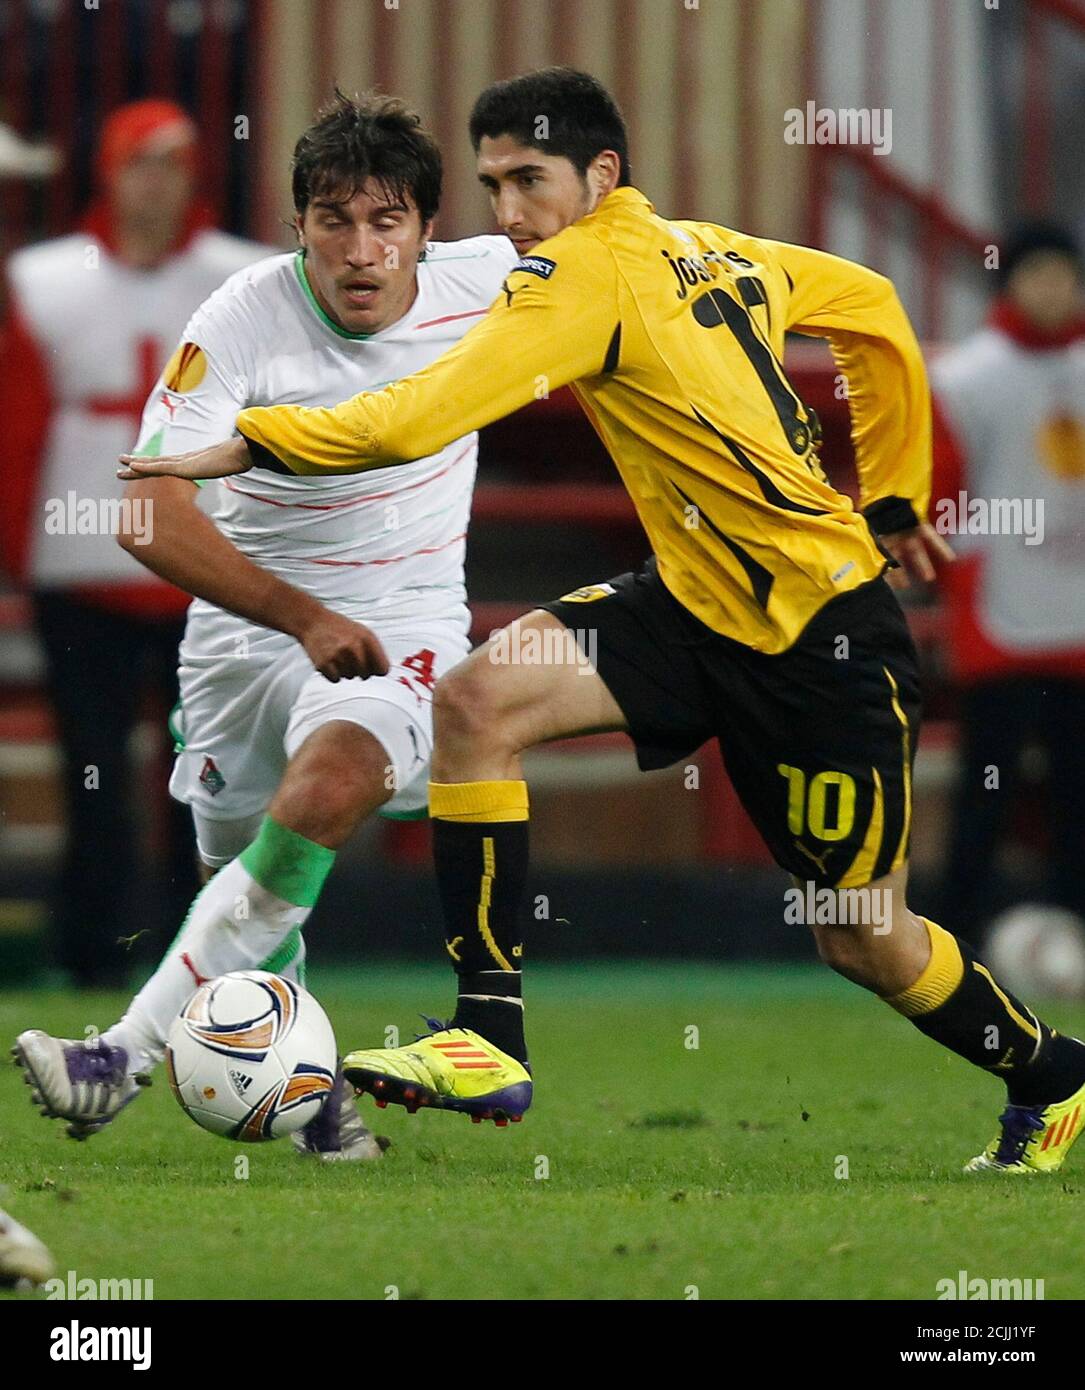 Lokomotiv Moscow's Alberto Zapater (L) fights for the ball with AEK Athens'  Jose Carlos during their Europa League Group L soccer match at the Lokomotiv  stadium in Moscow October 20, 2011. REUTERS/Grigory